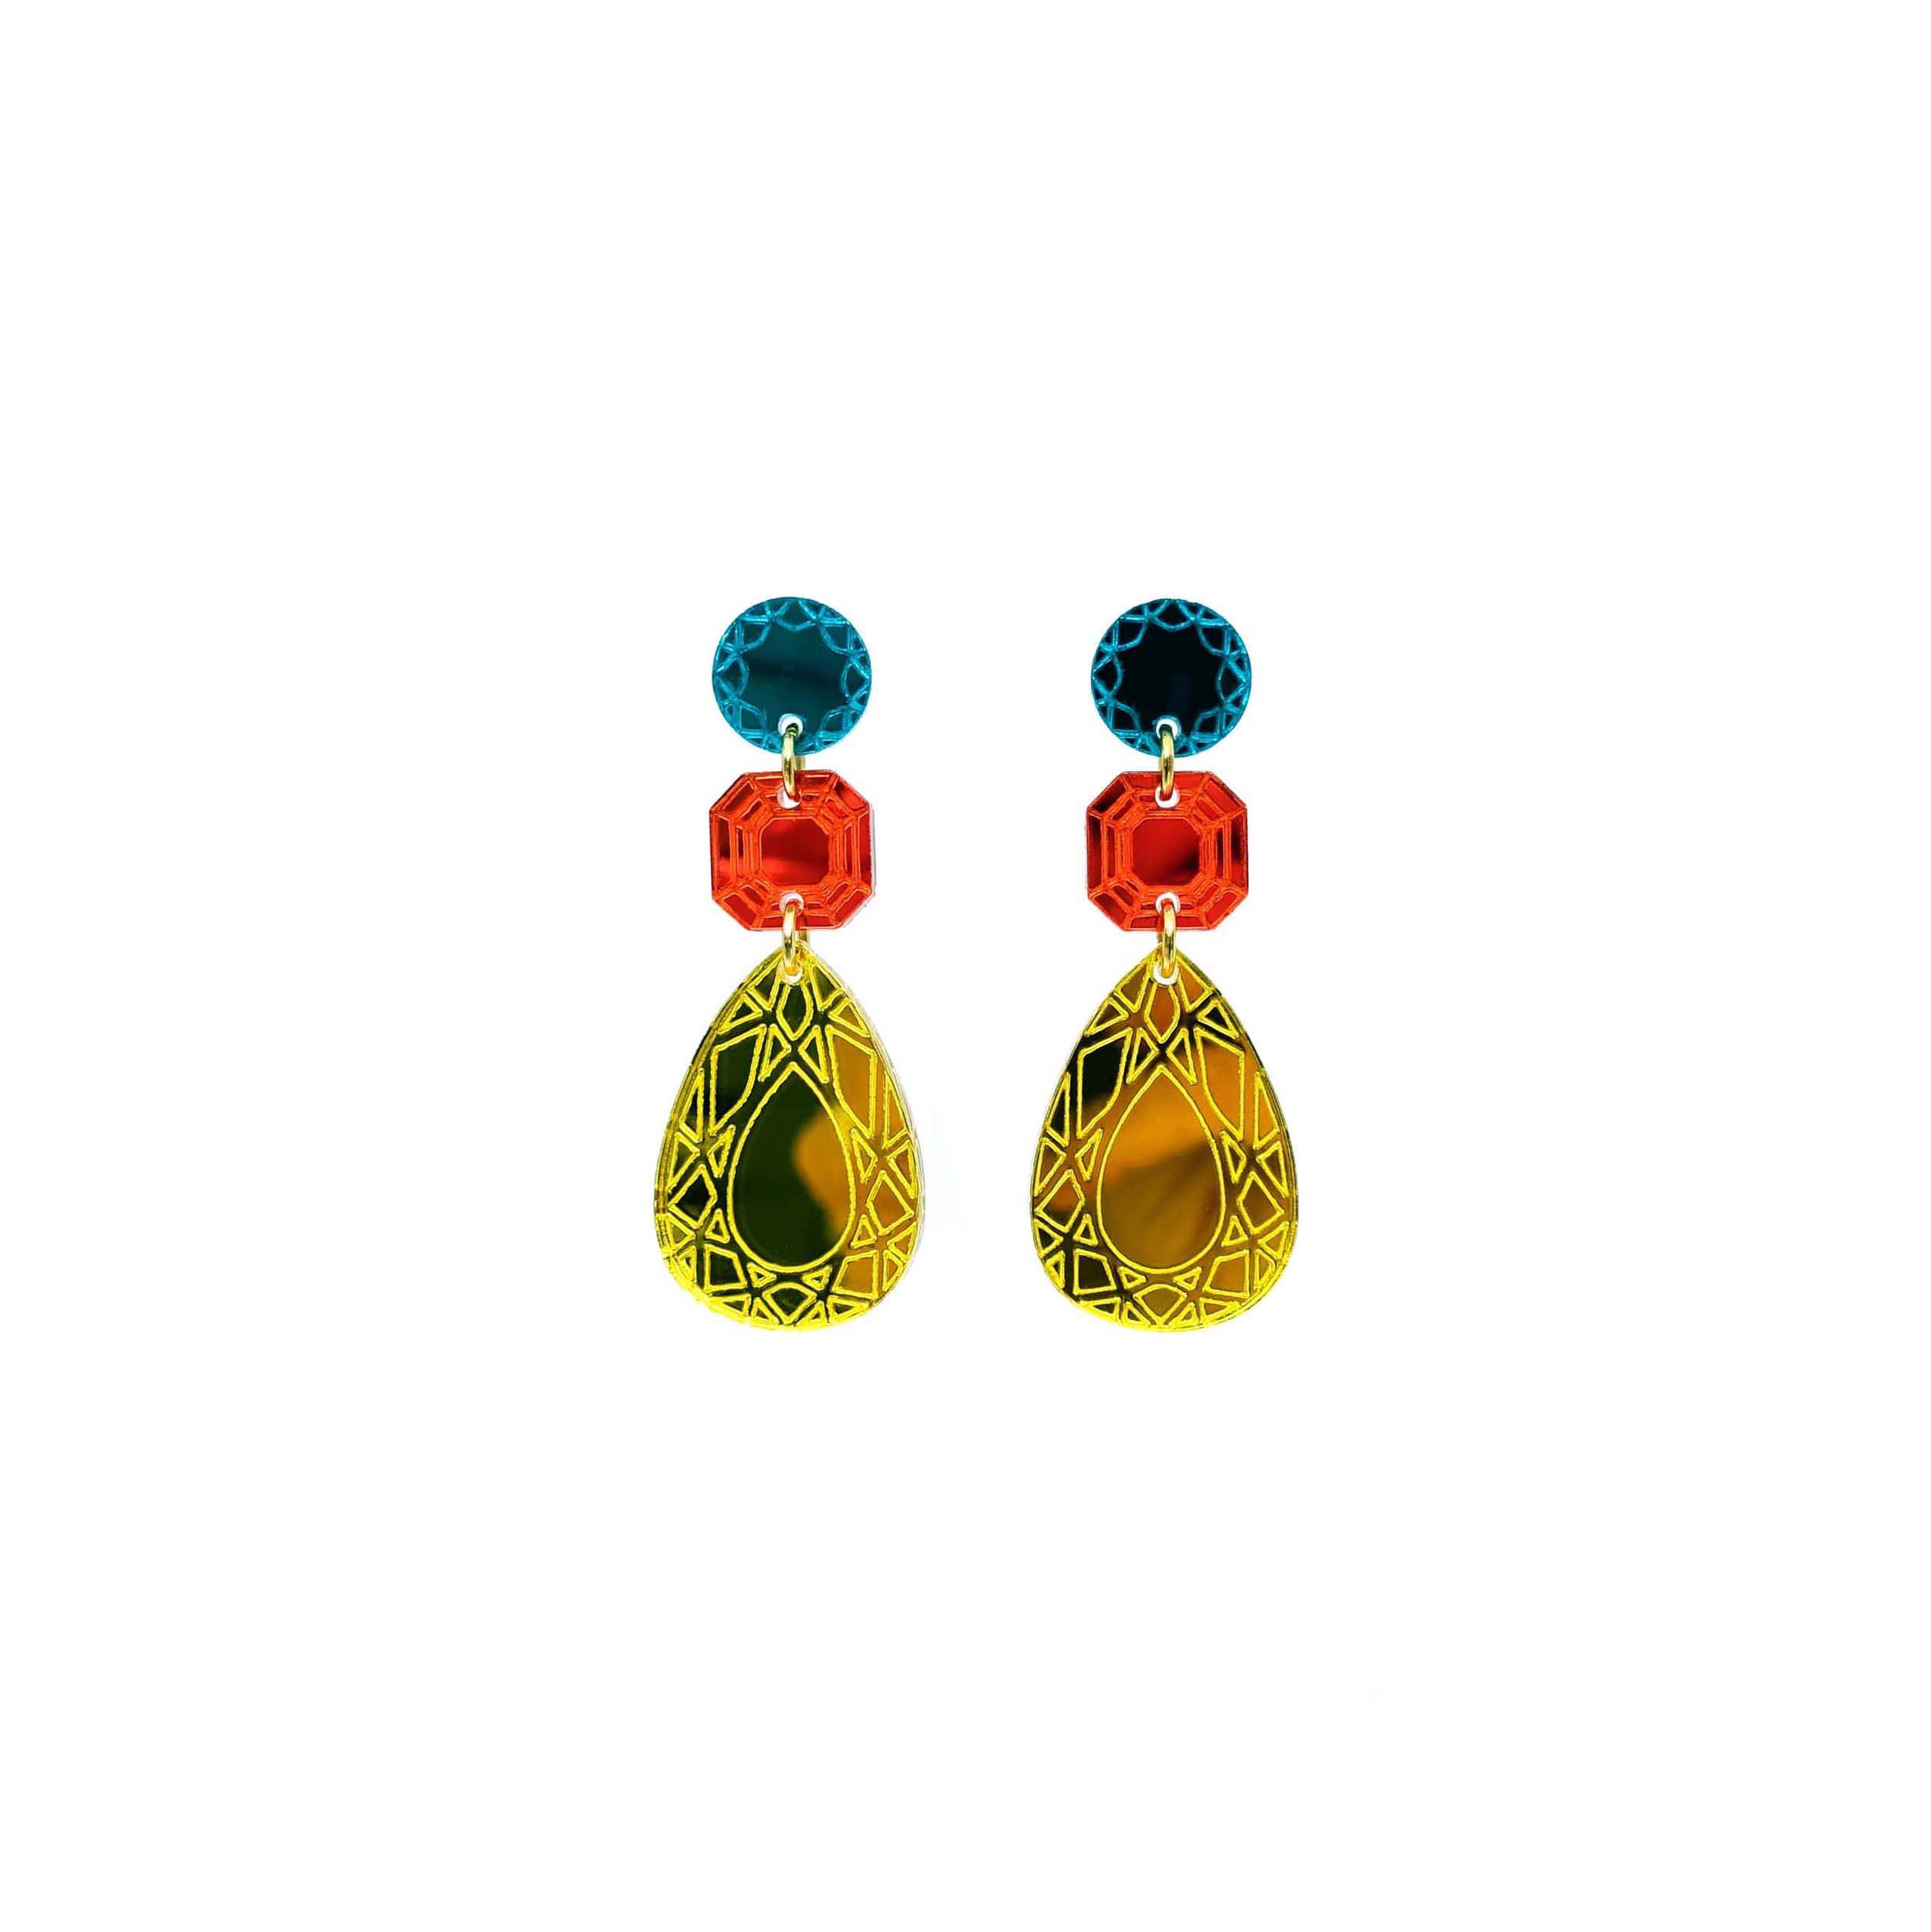 Belle Époque Jewel drop earrings in Flame Mambo: yellow, flame and teal colours. Designed by Sarah Day as part of the Austerity Jewels collection for Wear and Resist. We can all be royal. 